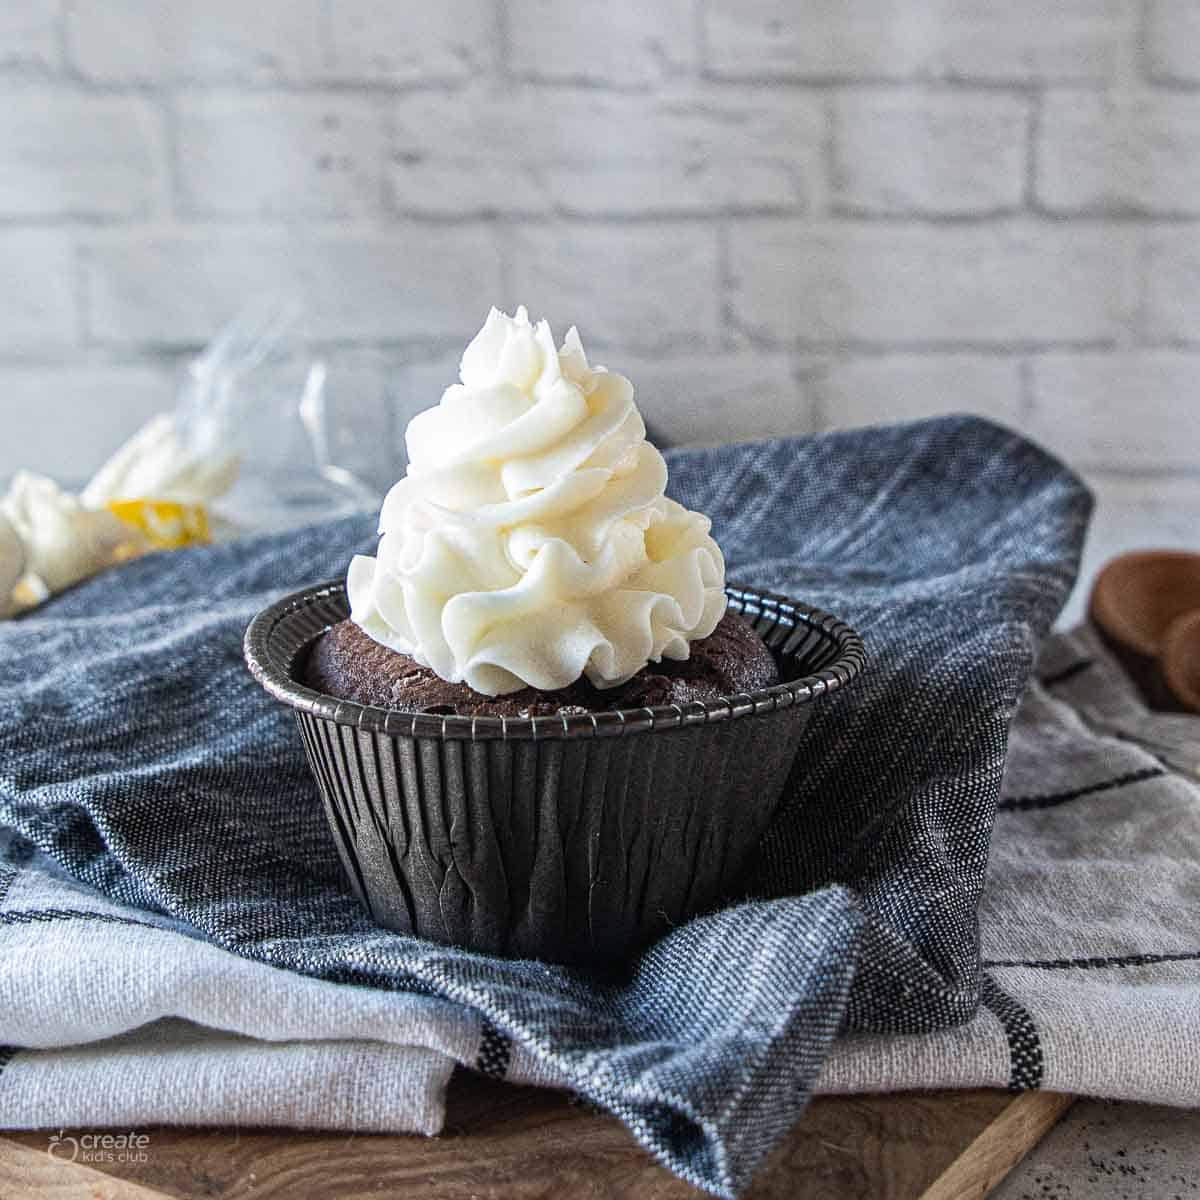 white icing piped on top of chocolate cupcake